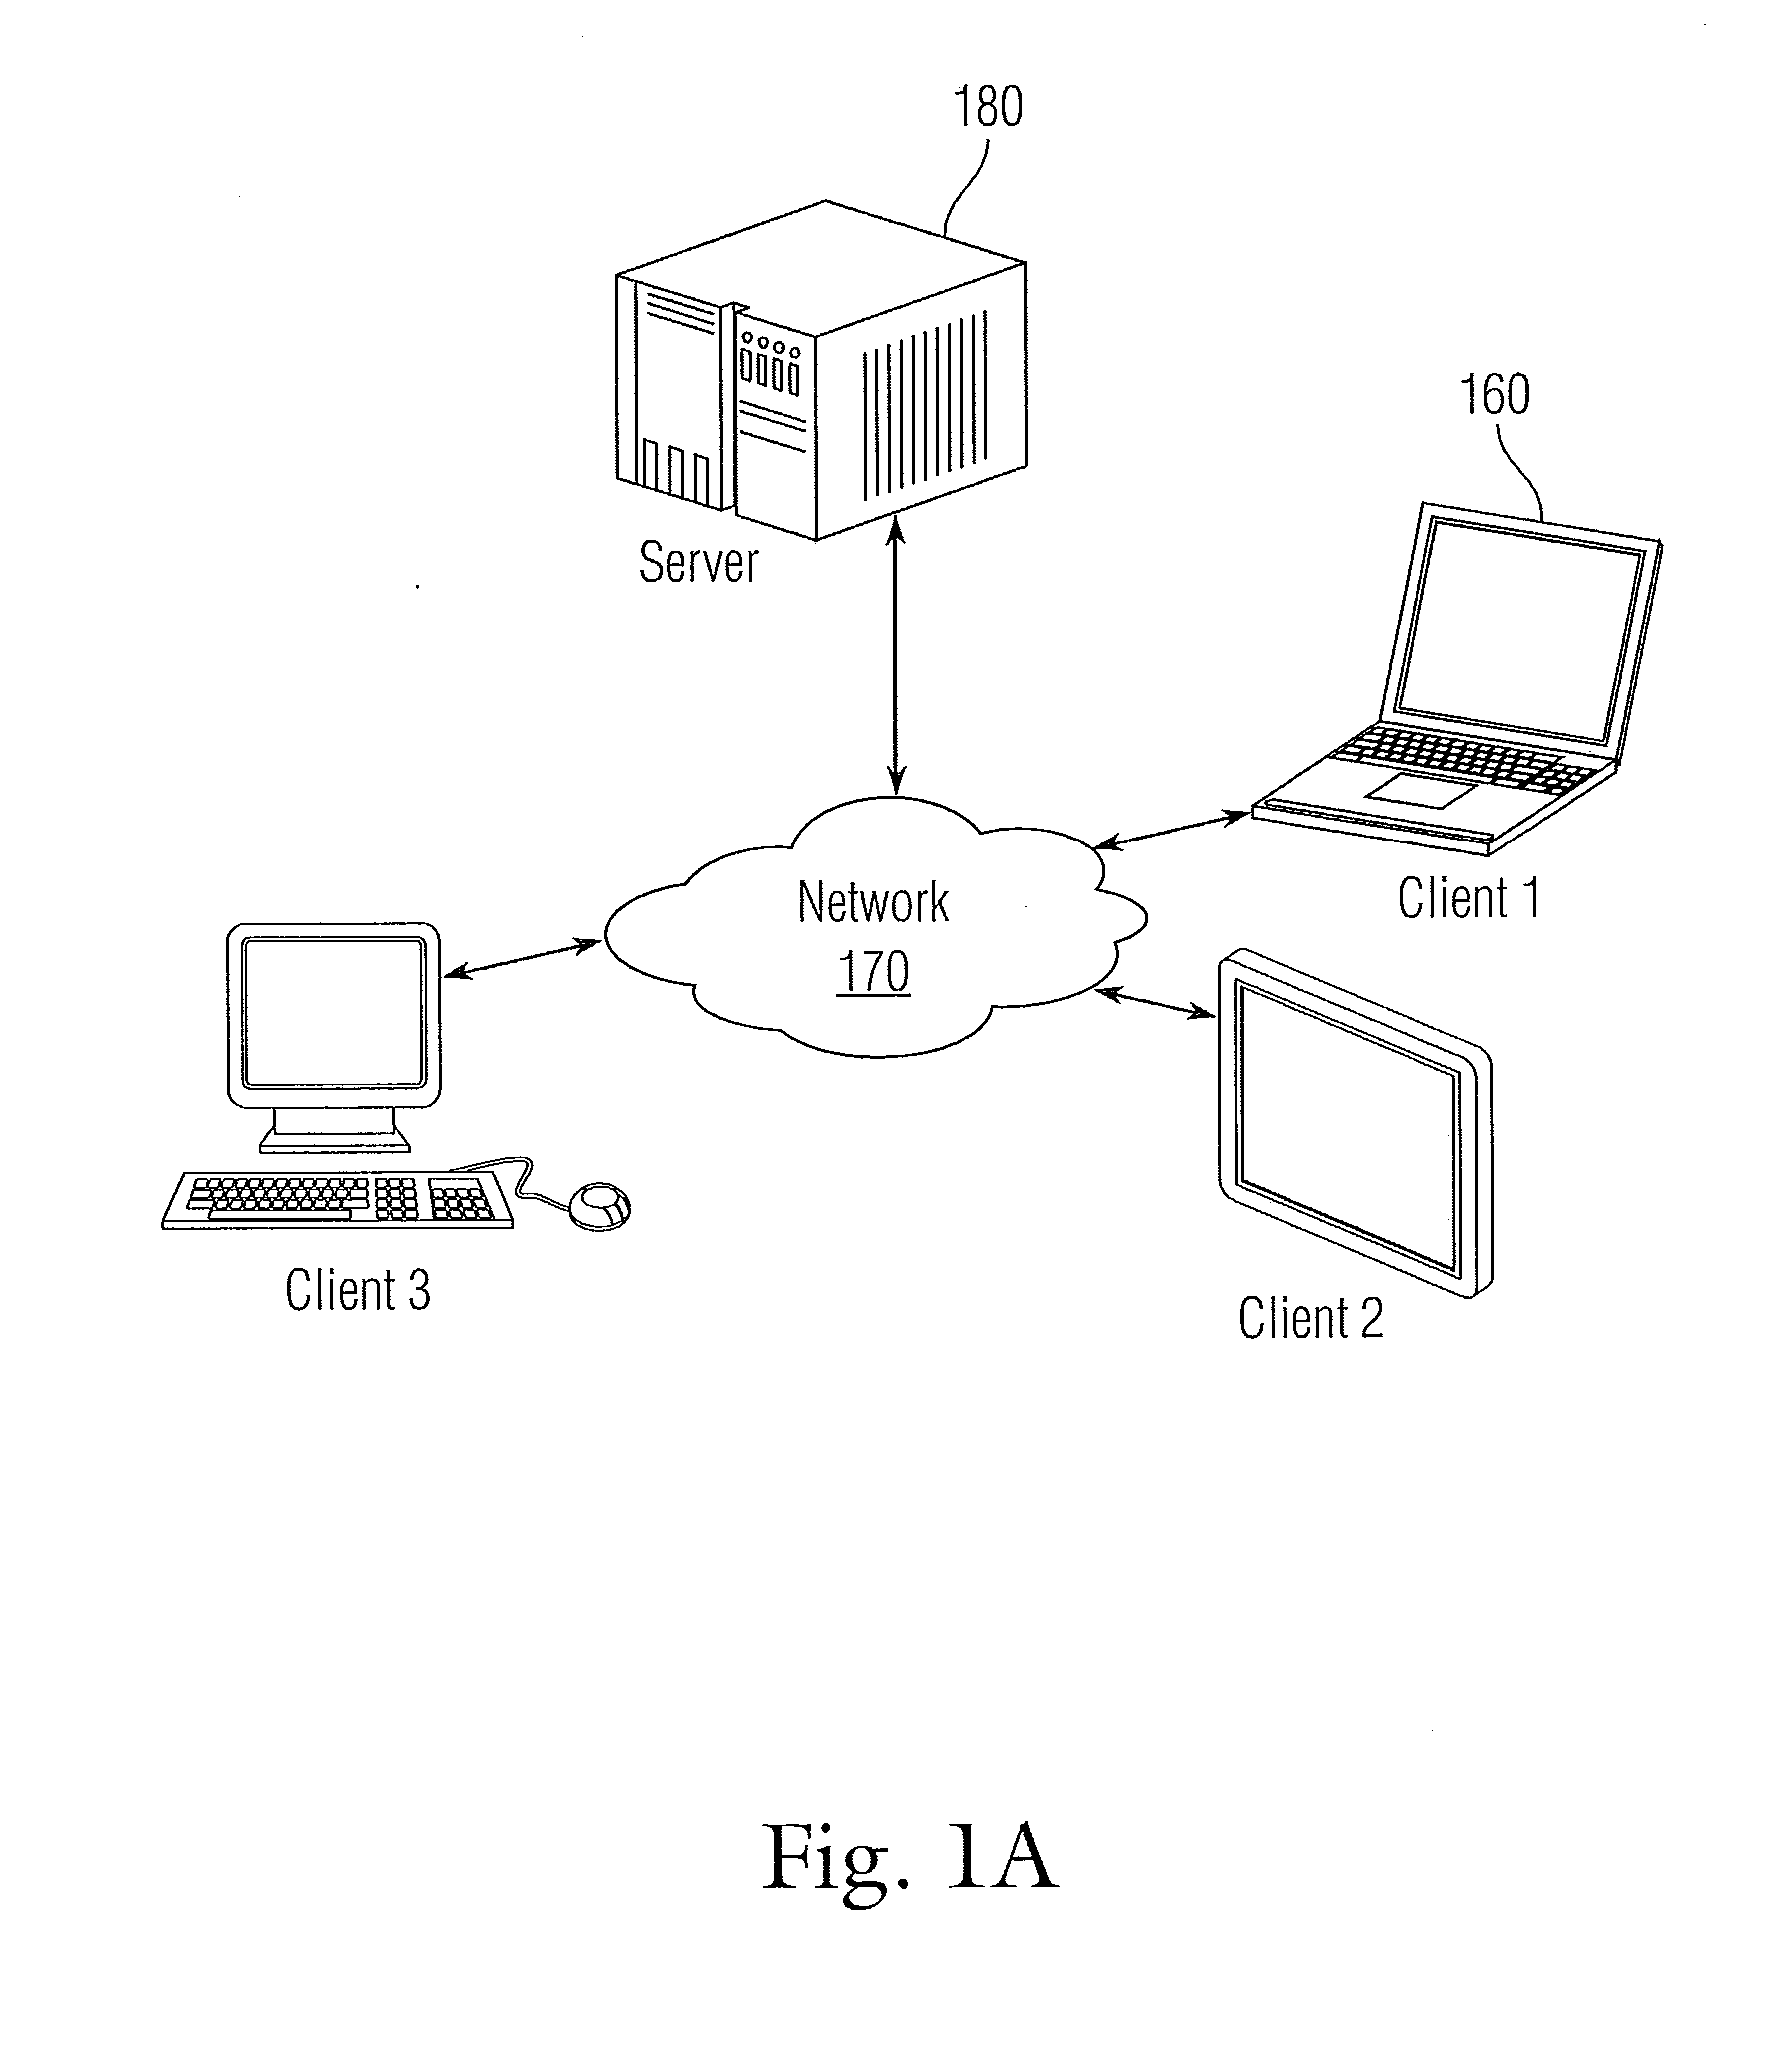 Automated health data acquisition, processing and communication system